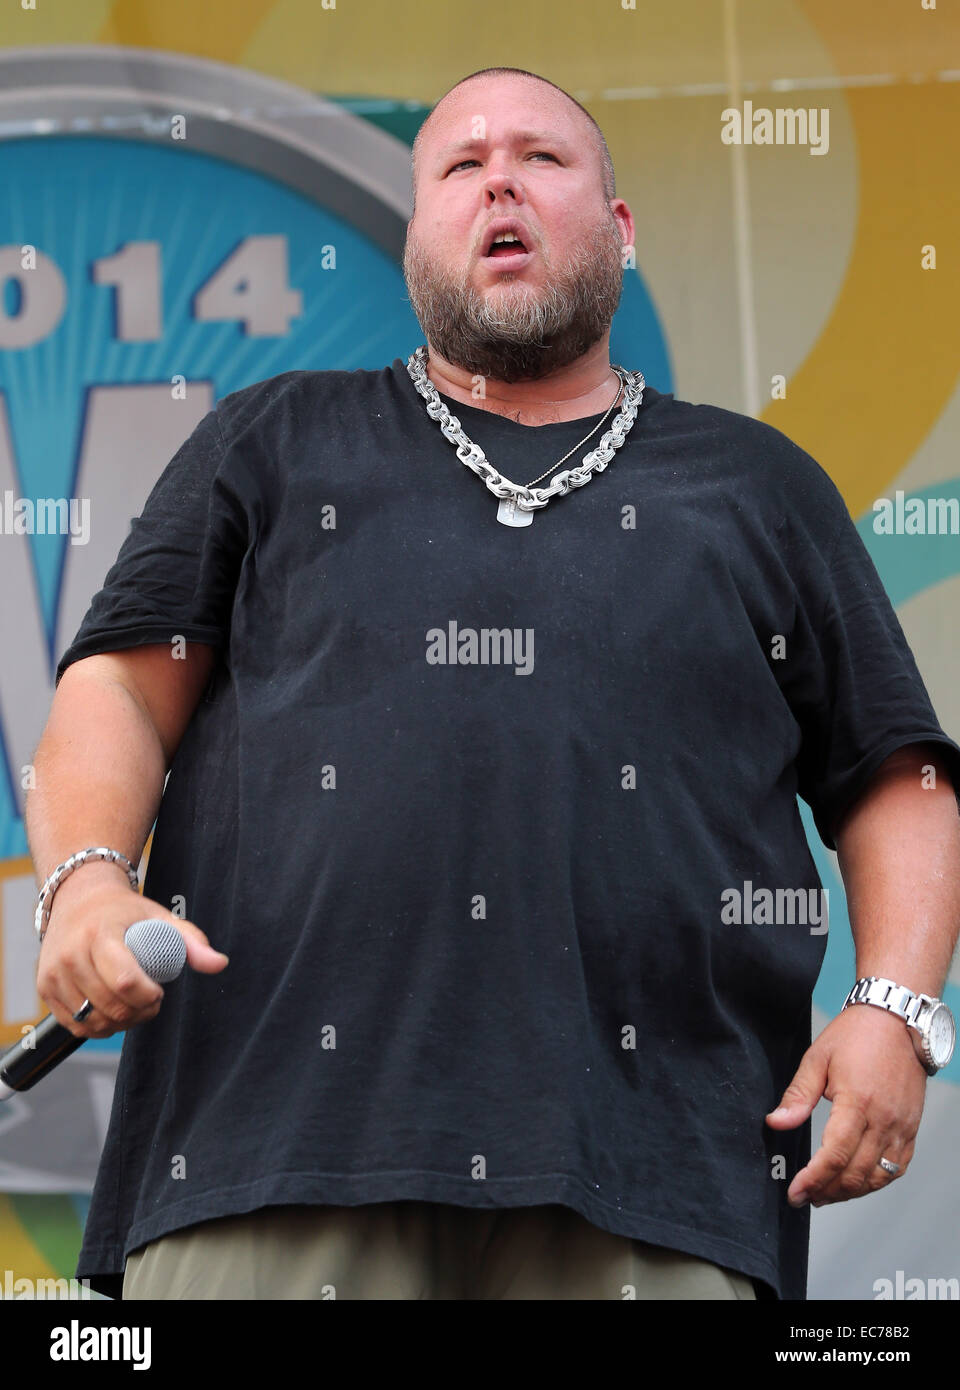 Big Smo Performs at Bud Light Stage at The 2014 CMA Music Festival Nashville  Featuring: Big Smo Where: Nashville, Tennessee, United States When: 06 Jun 2014 Stock Photo